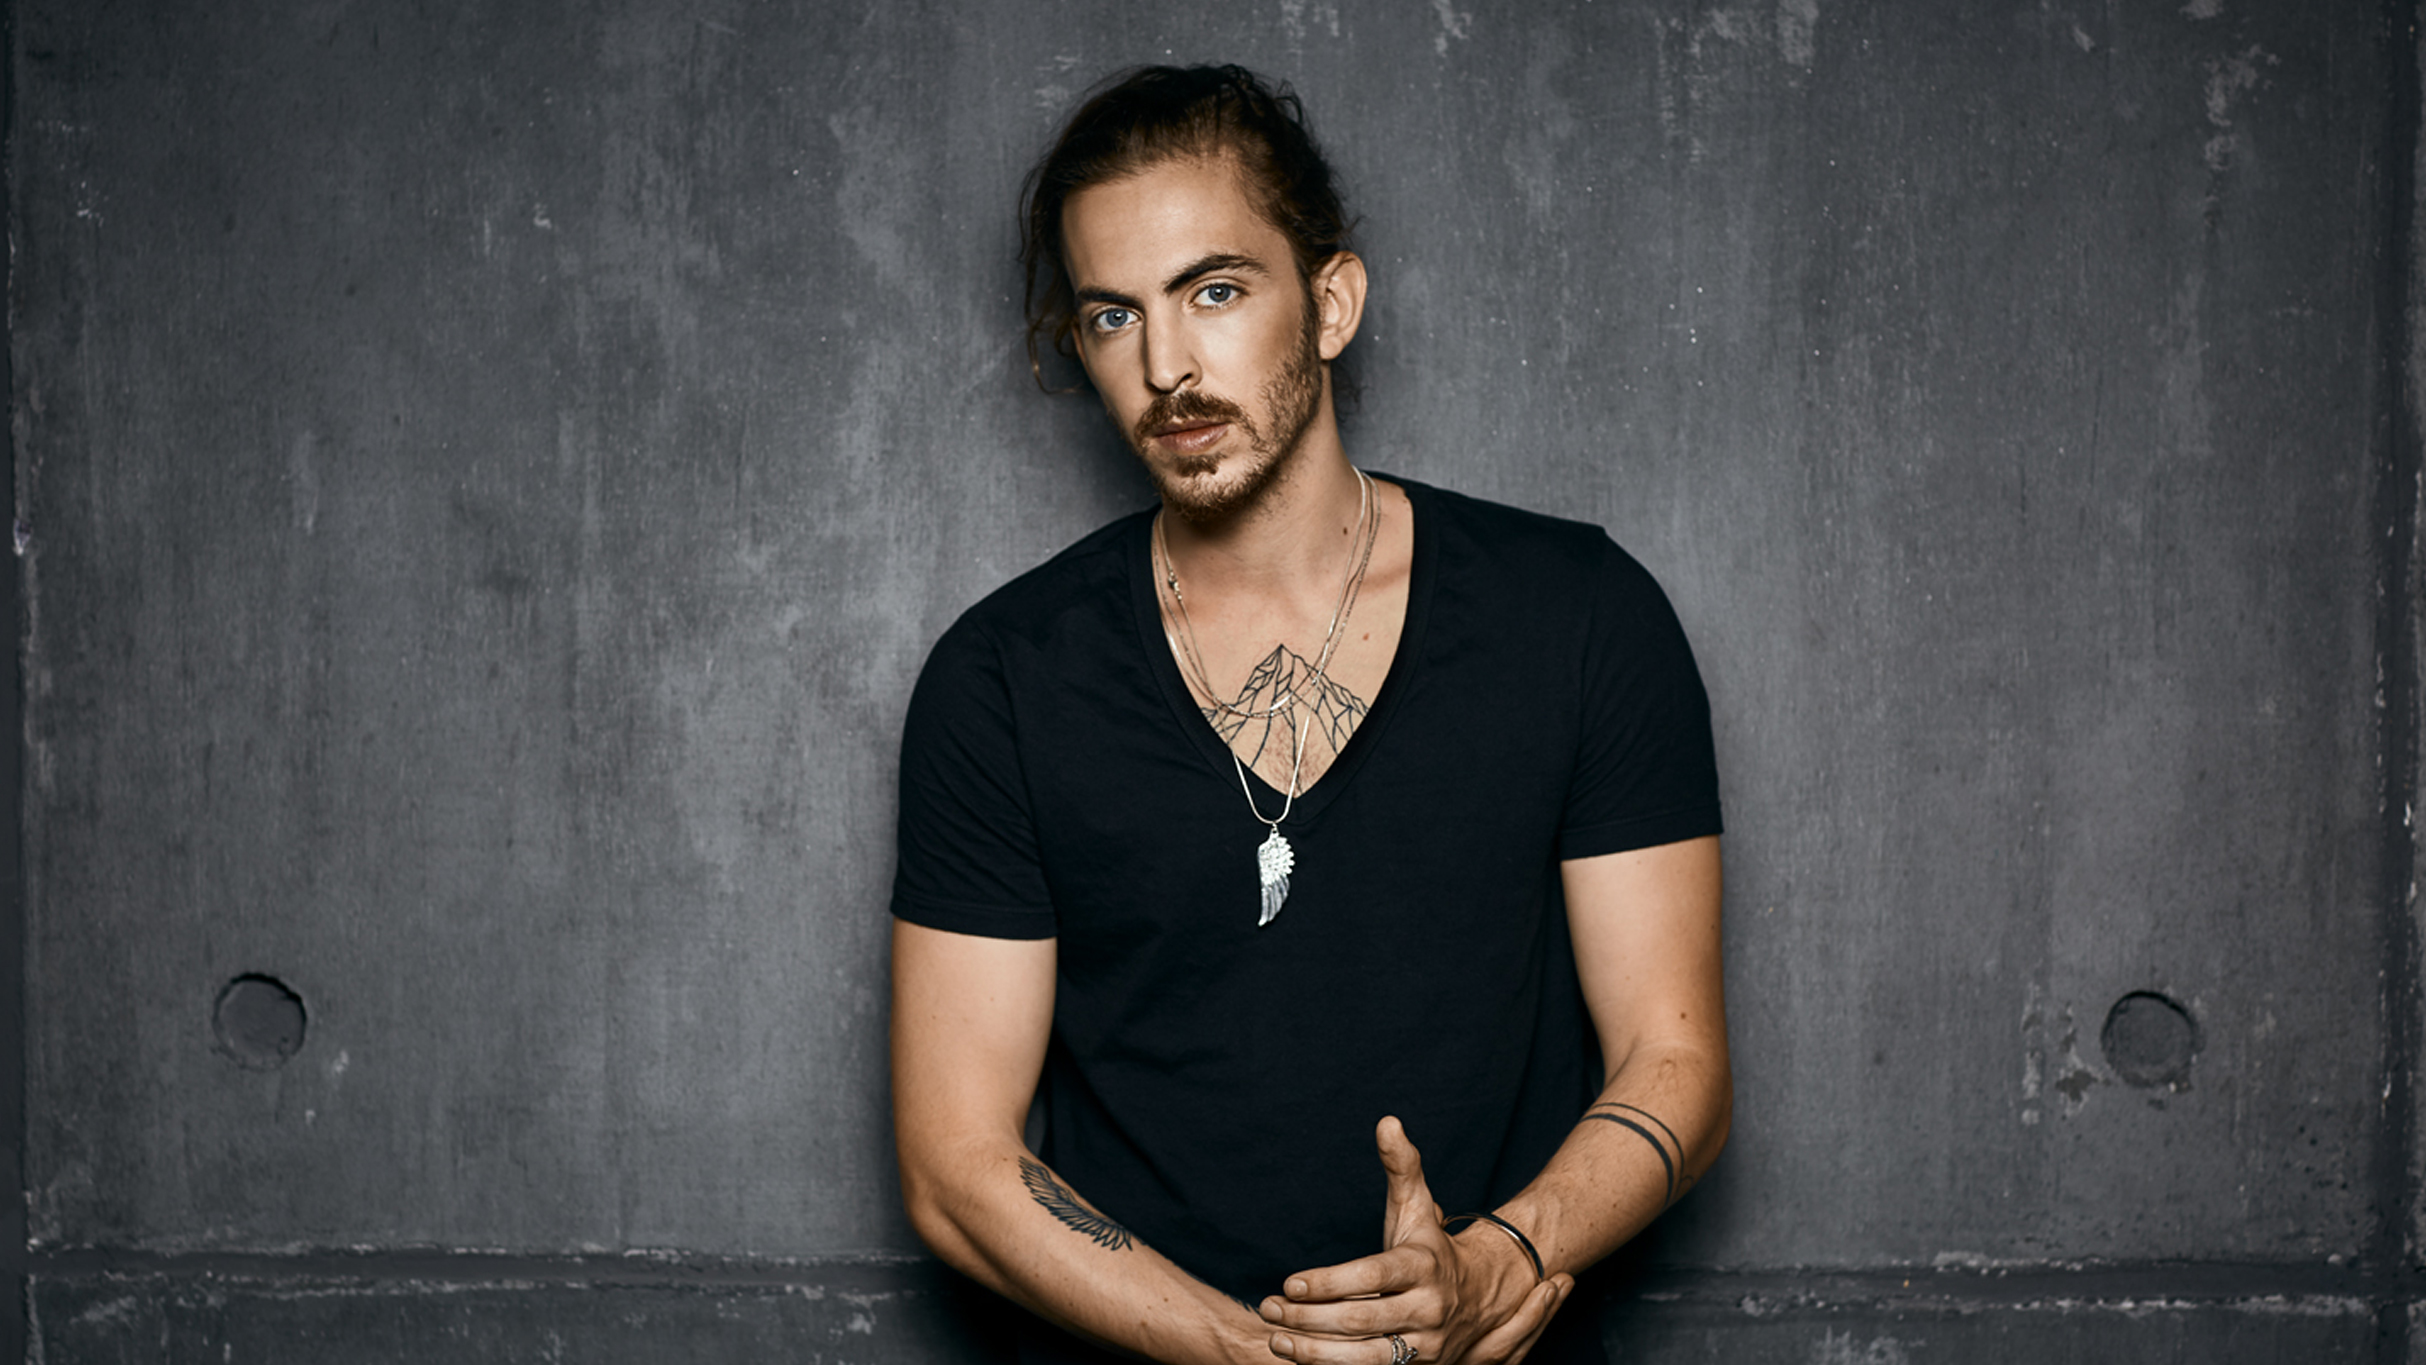 Governors Ball Presents Dennis Lloyd - The Never Go Back Tour in New York promo photo for Citi® Cardmember presale offer code